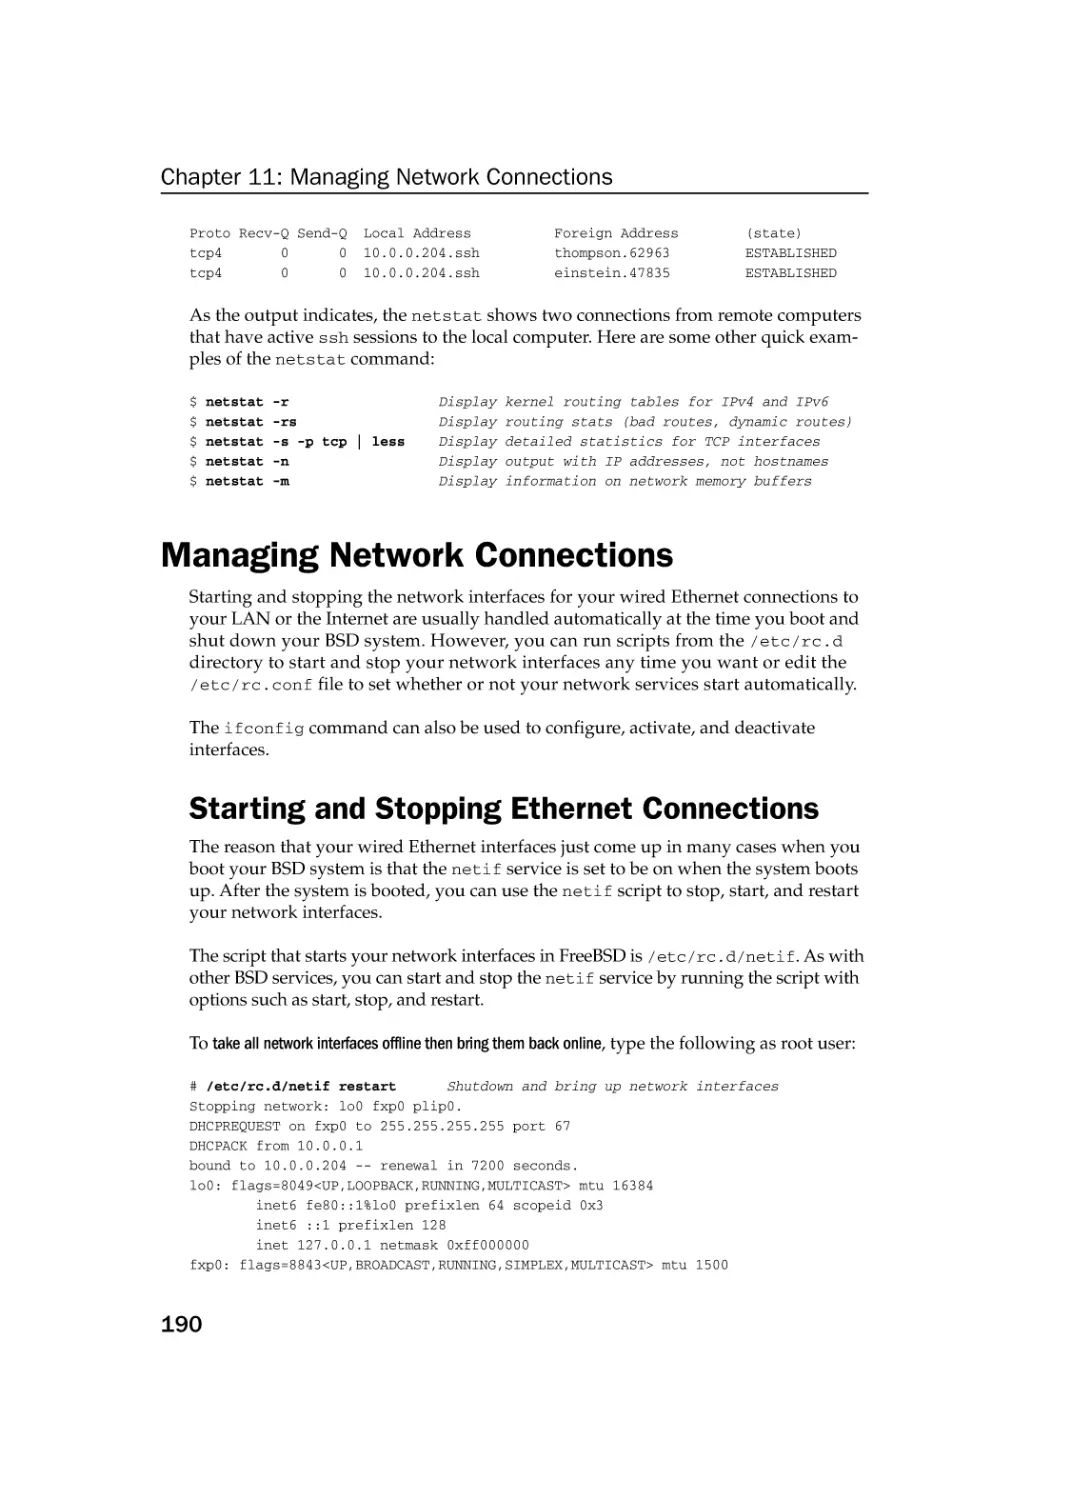 Managing Network Connections